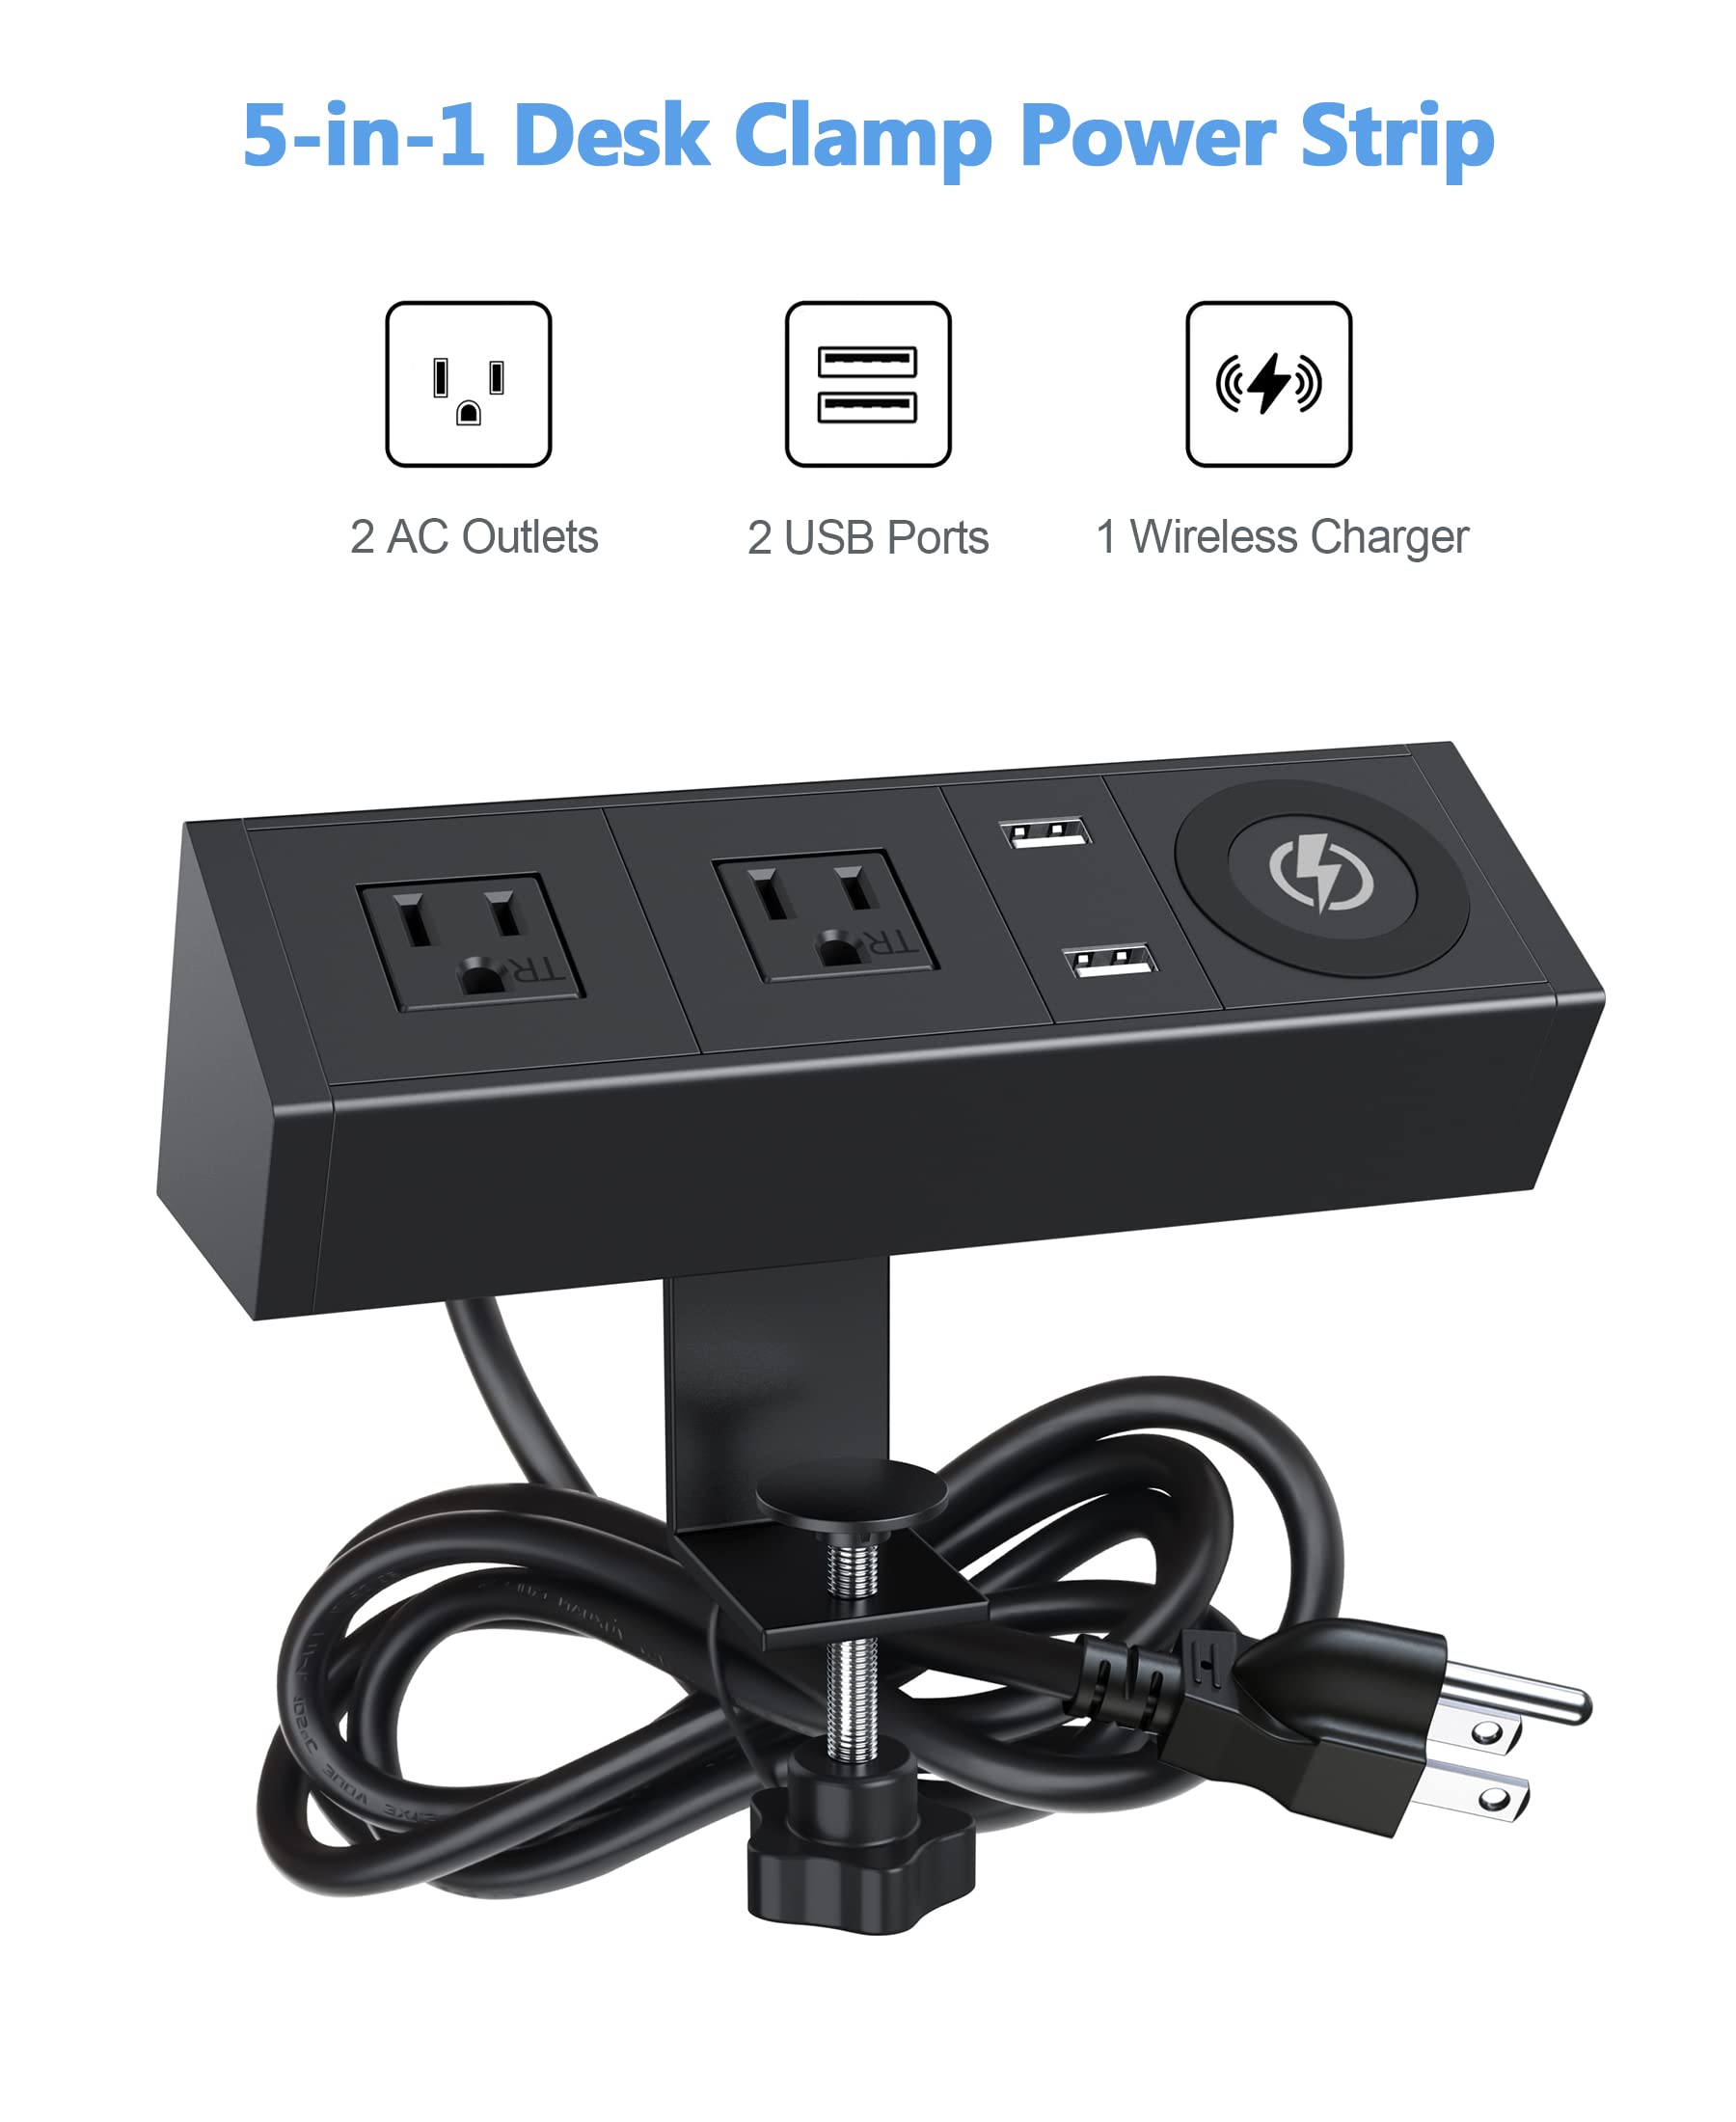 Desk Clamp Power Strip with Wireless Charger,Desk Mounted Power Strip with USB,900 Joules Surge Protector Desk Edge Power Strip,Desk Power Station with 2 Outlet and 2 USB Ports,6ft Cable